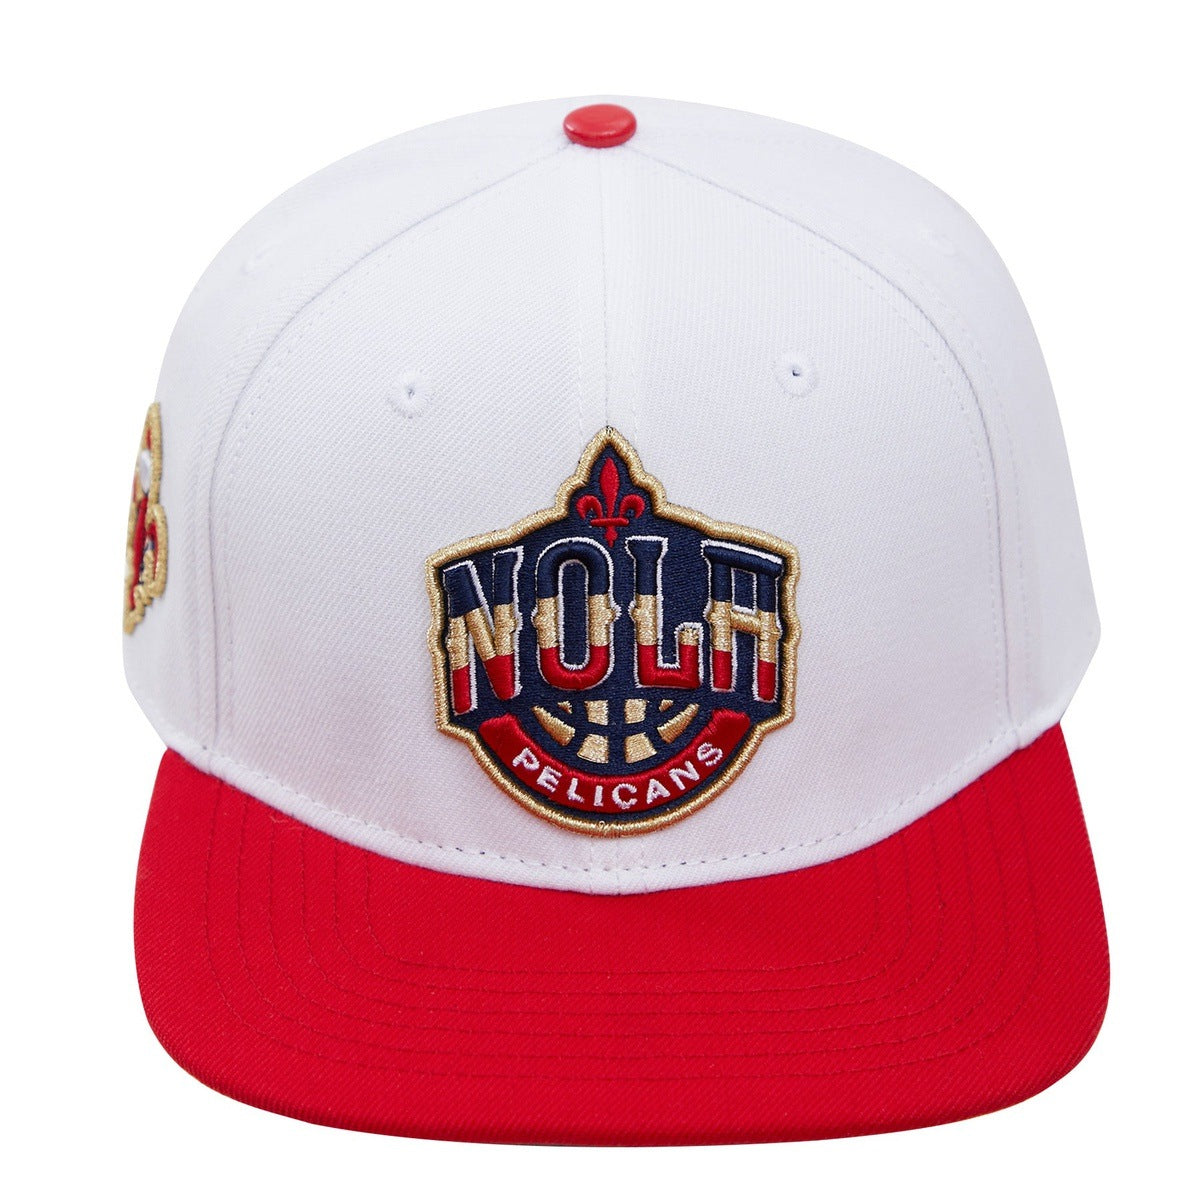 NEW ORLEANS PELICANS CLASSIC LOGO SNAPBACK HAT (WHITE) – Pro Standard